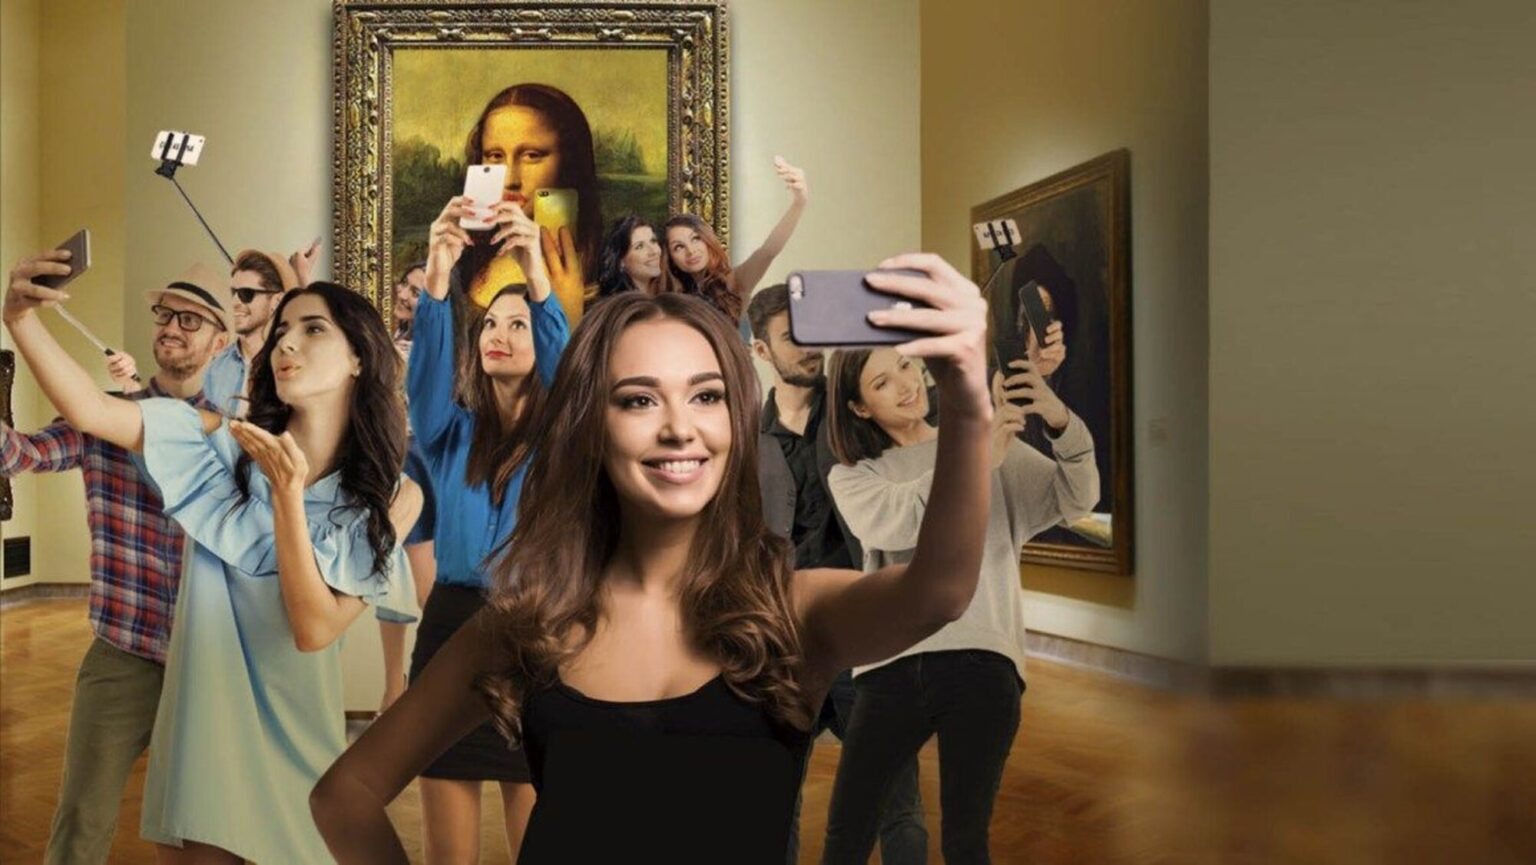 There seems to be a museum for just about everything these days. Find out why the Museum of Selfies should be your next travel destination here.